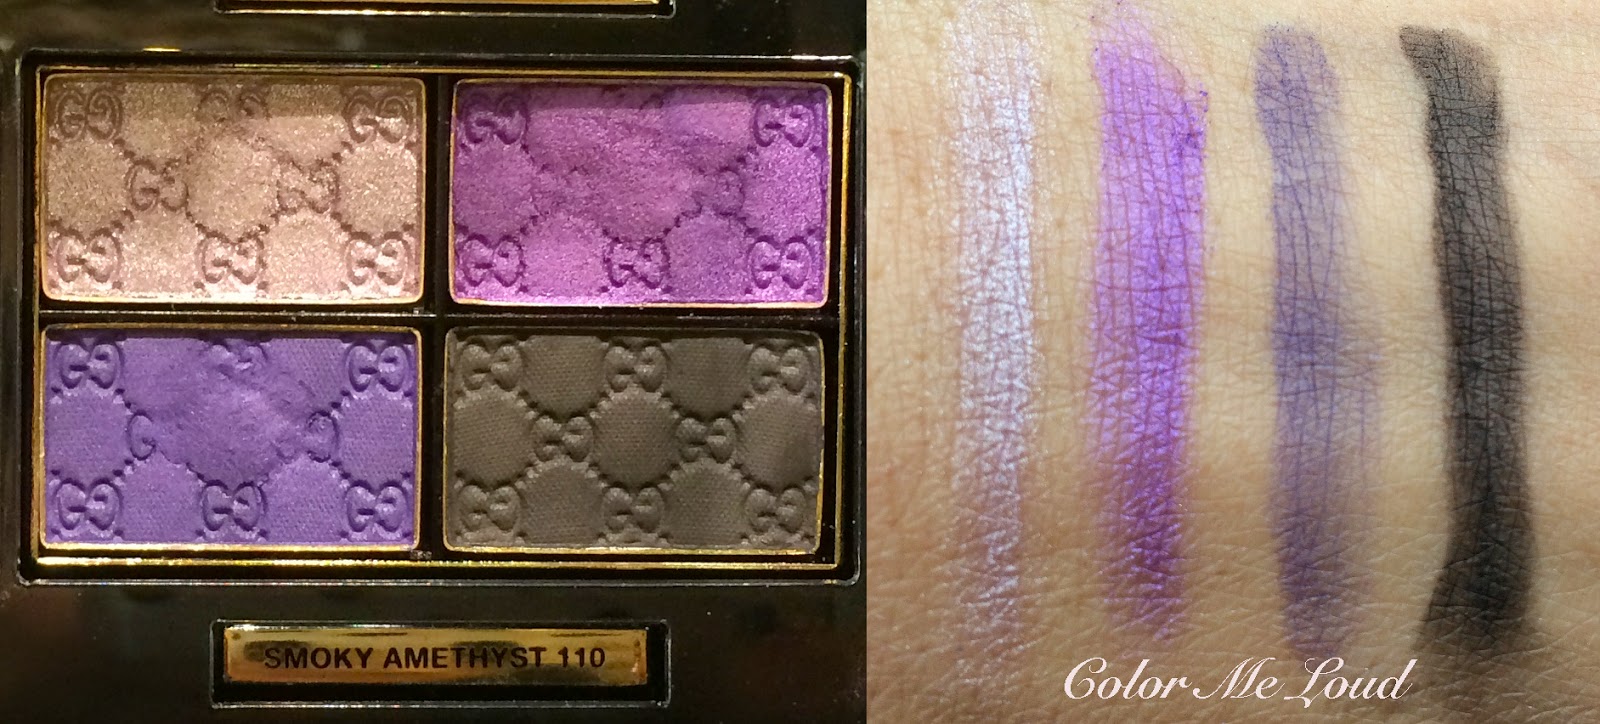 Swatch: Gucci Magnetic Color Eye Shadow Quad in Smoky Amethyst